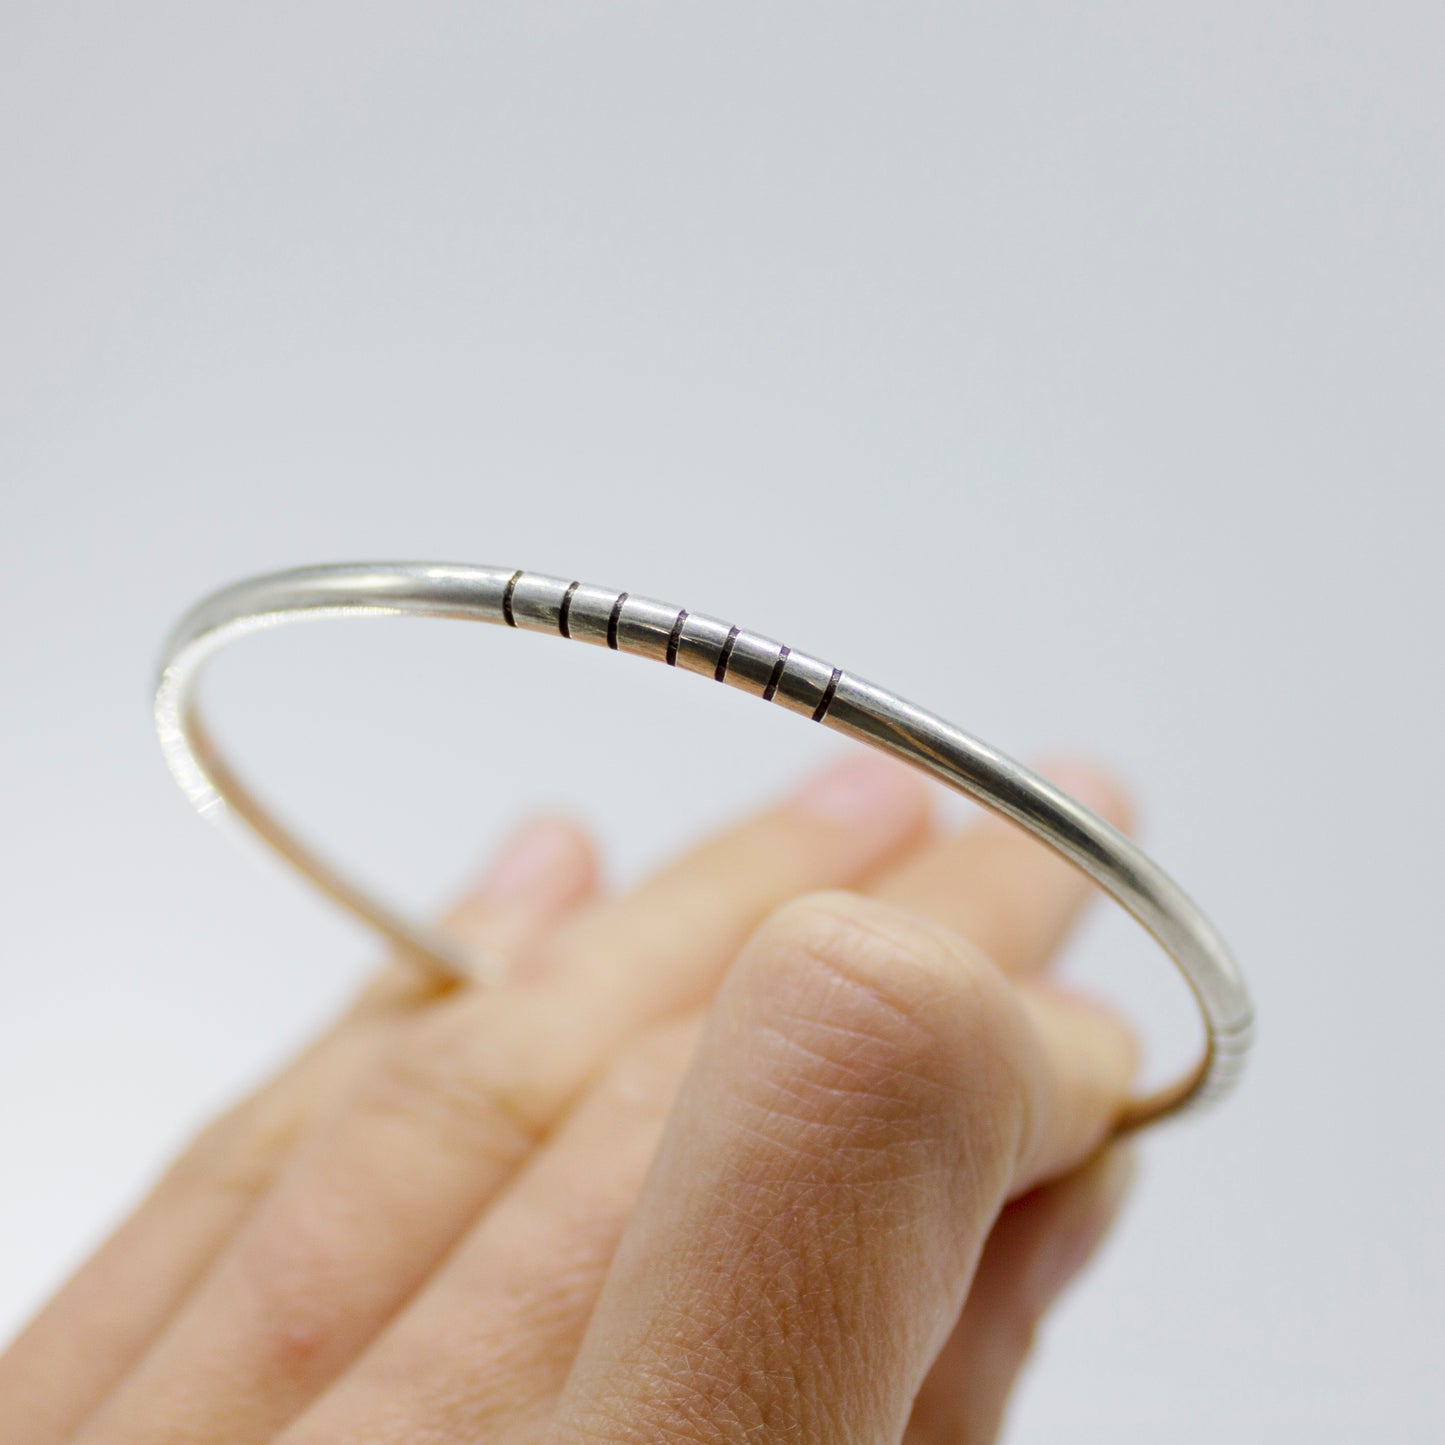 Andrea Mueller, Round Bangle with Linear Details